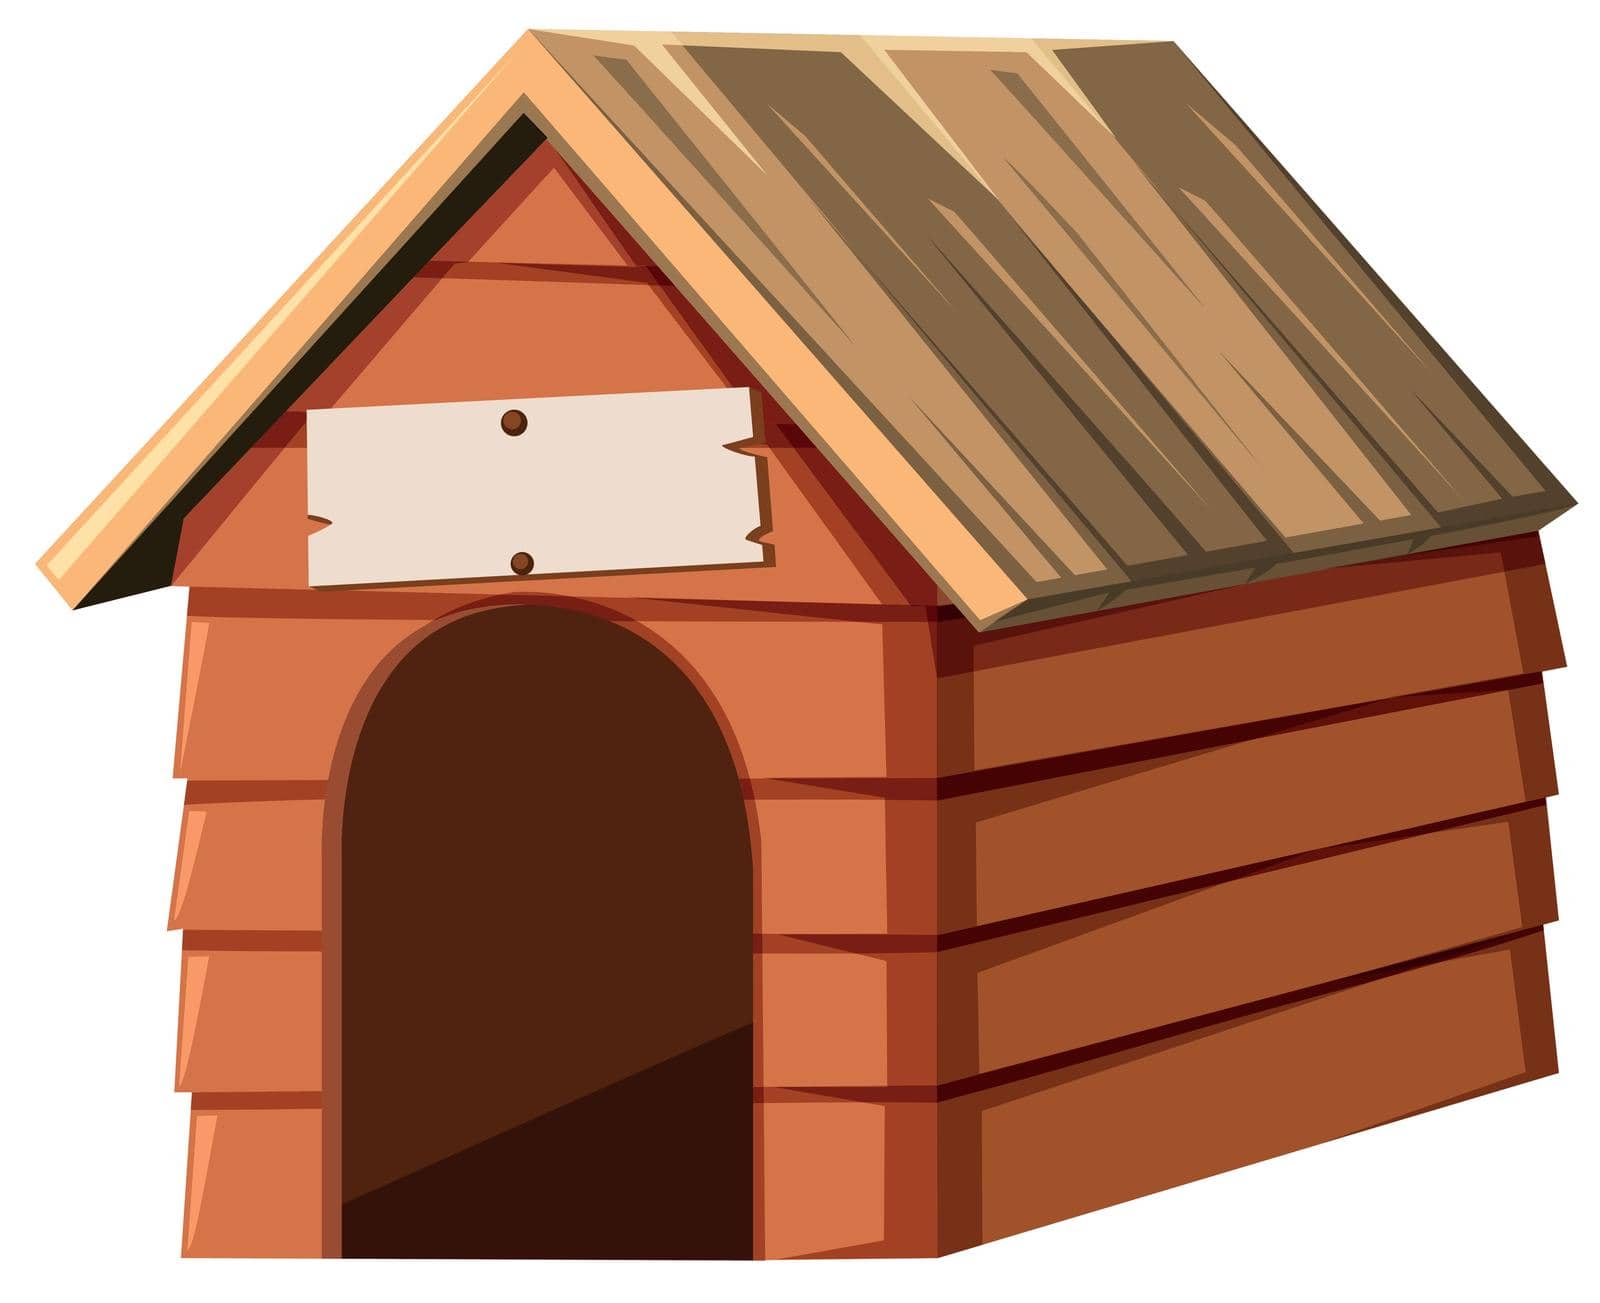 Doghouse made of wood by iimages